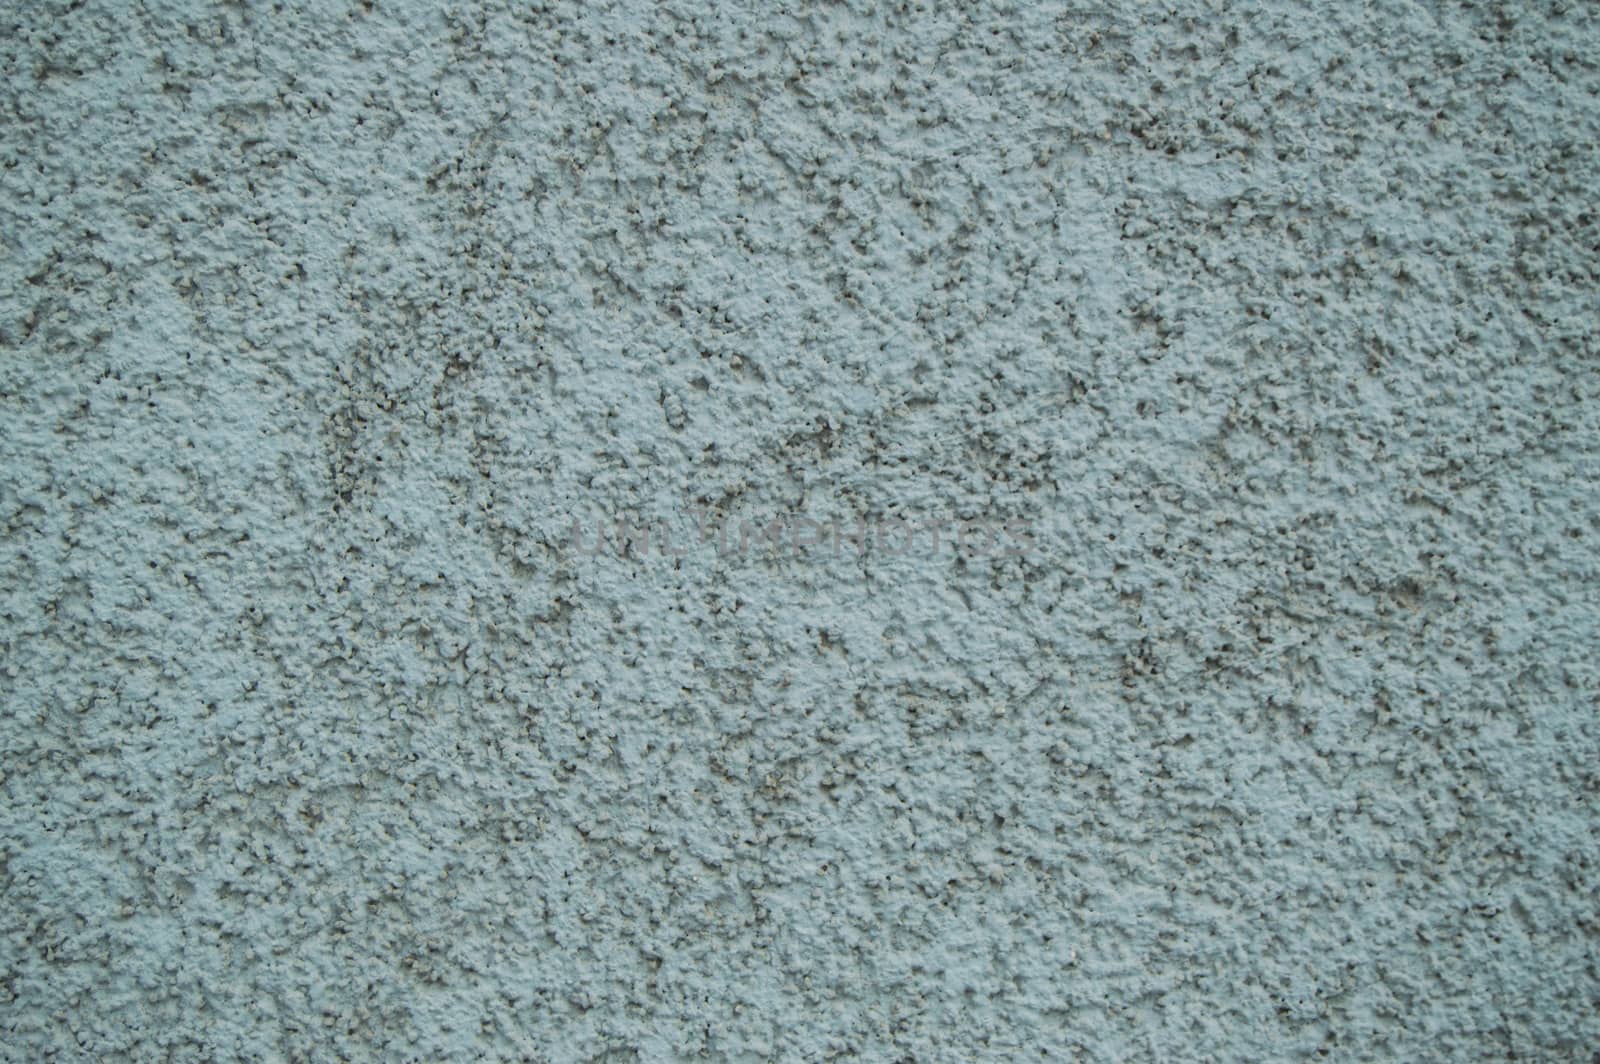 Blue rough abstract stucco texture for background.